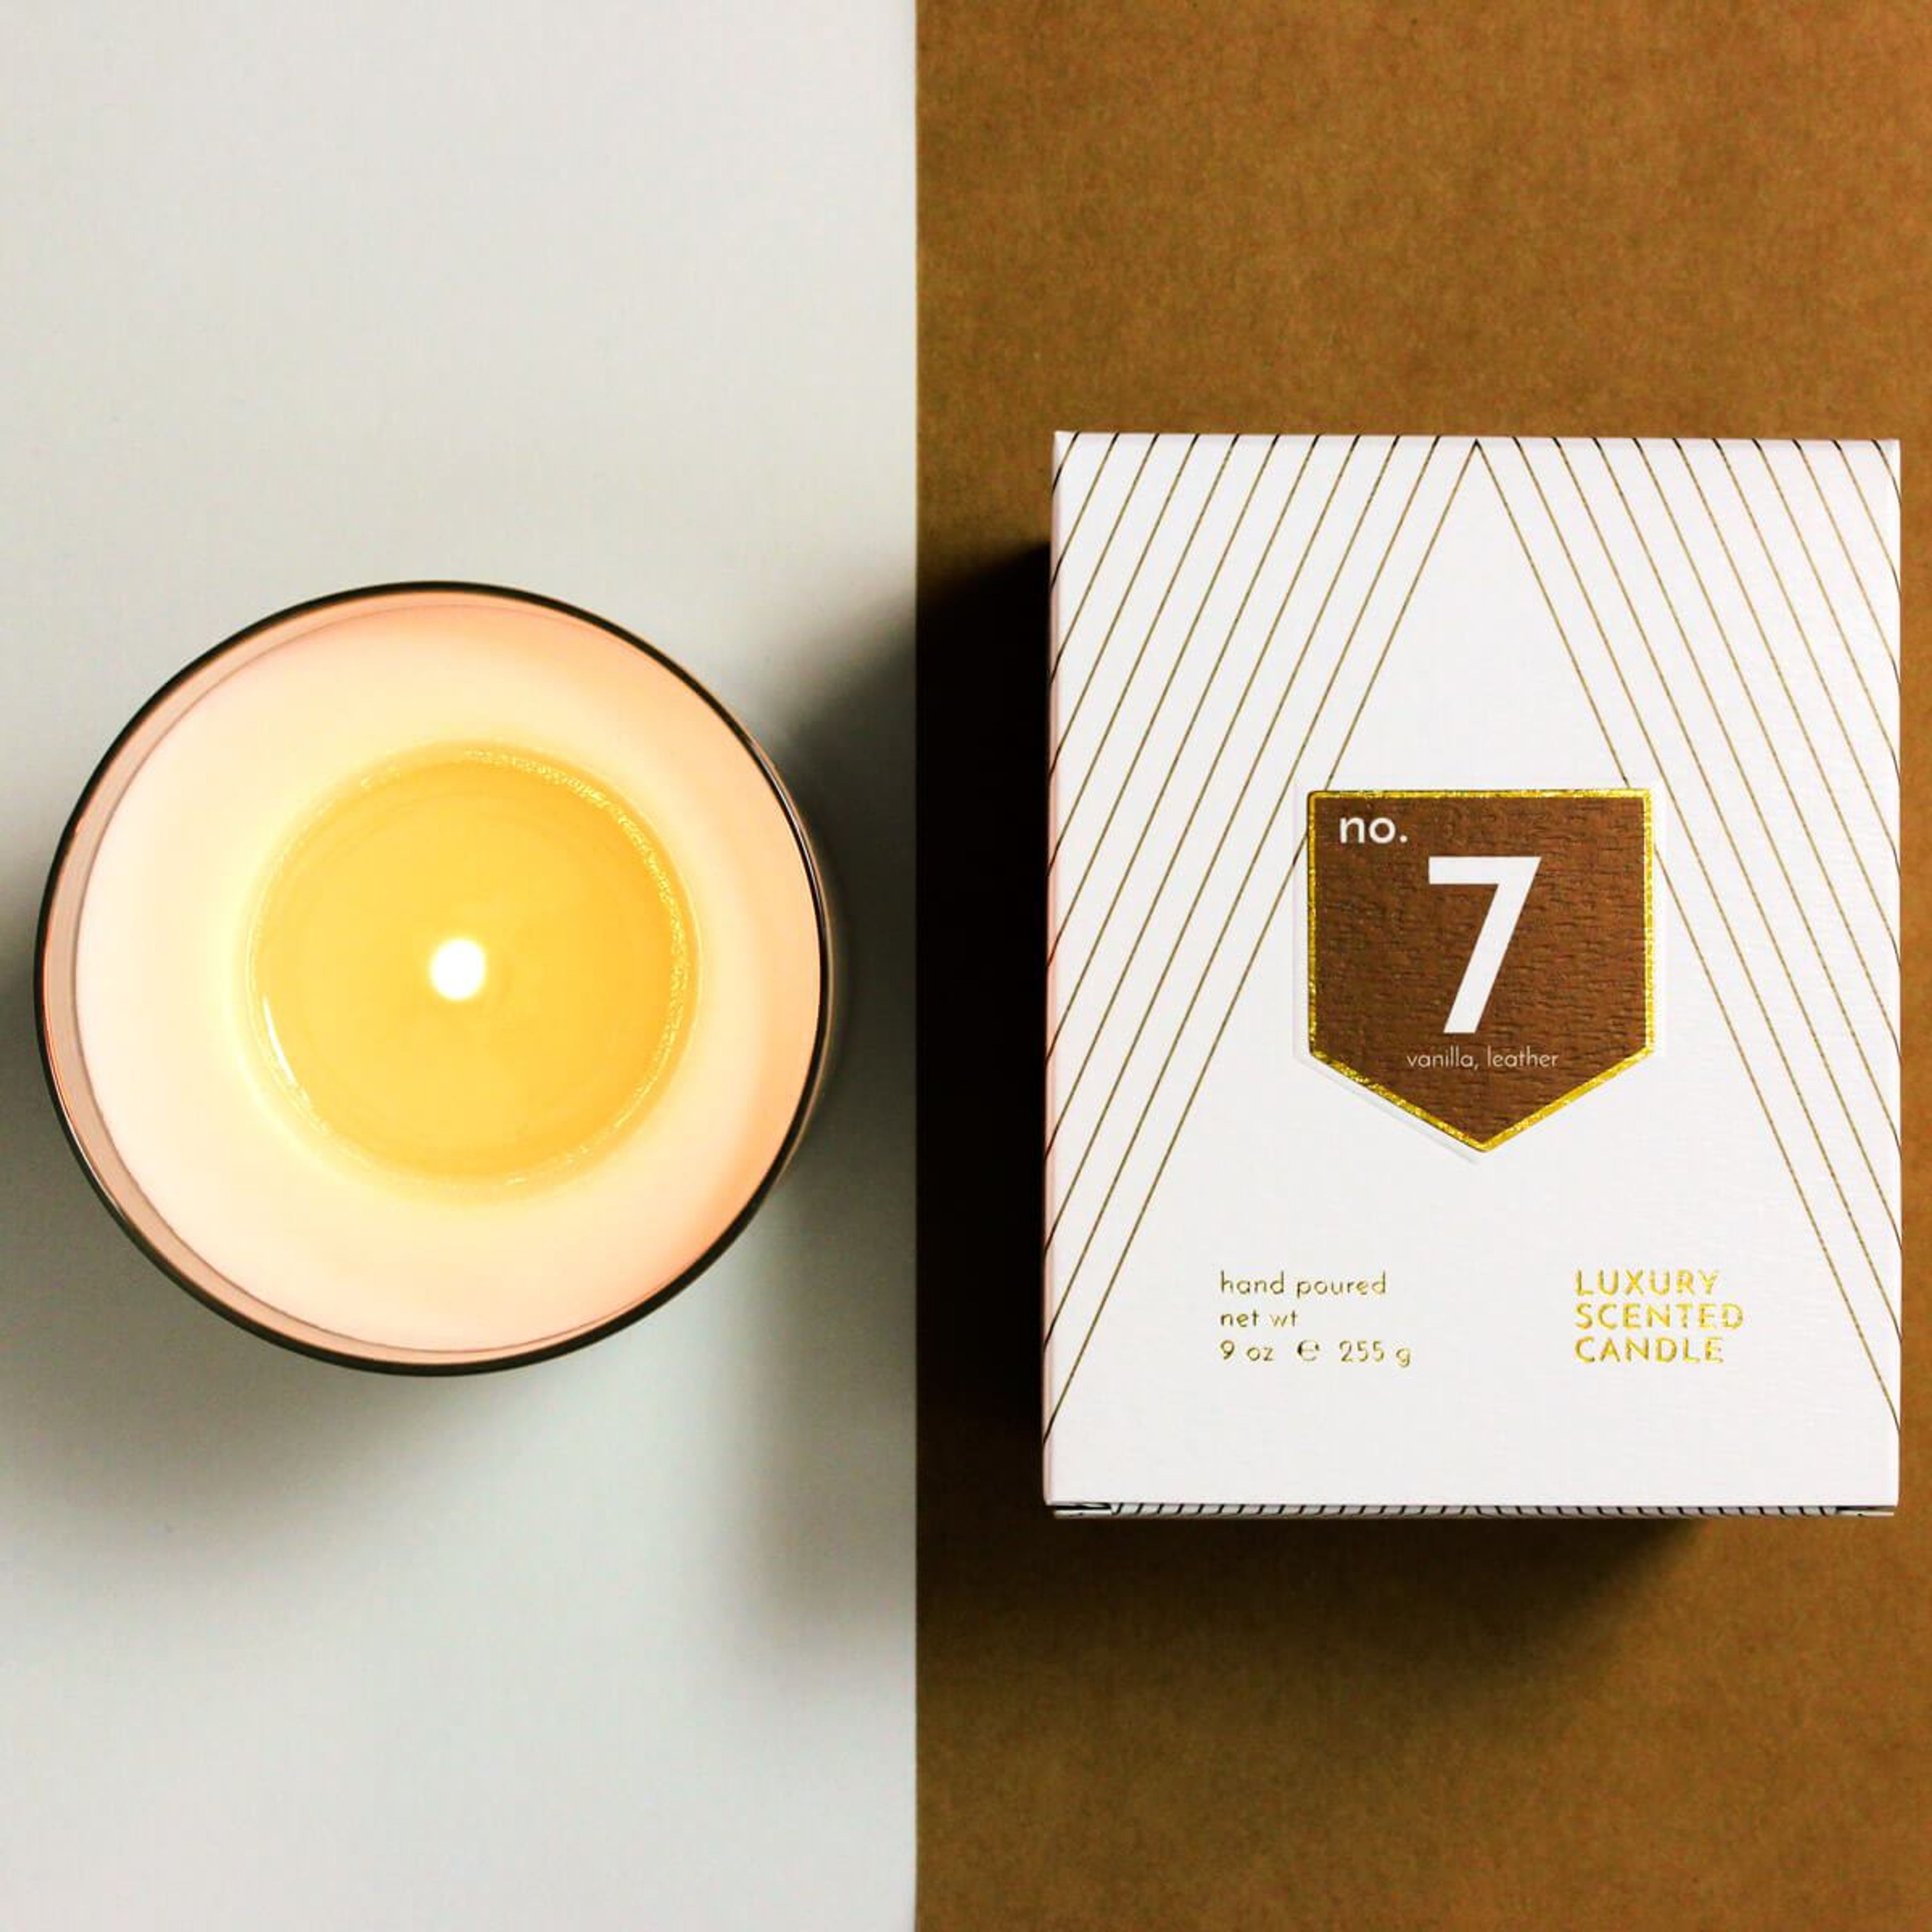 No. 7 Vanilla Leather Scented Soy Candle